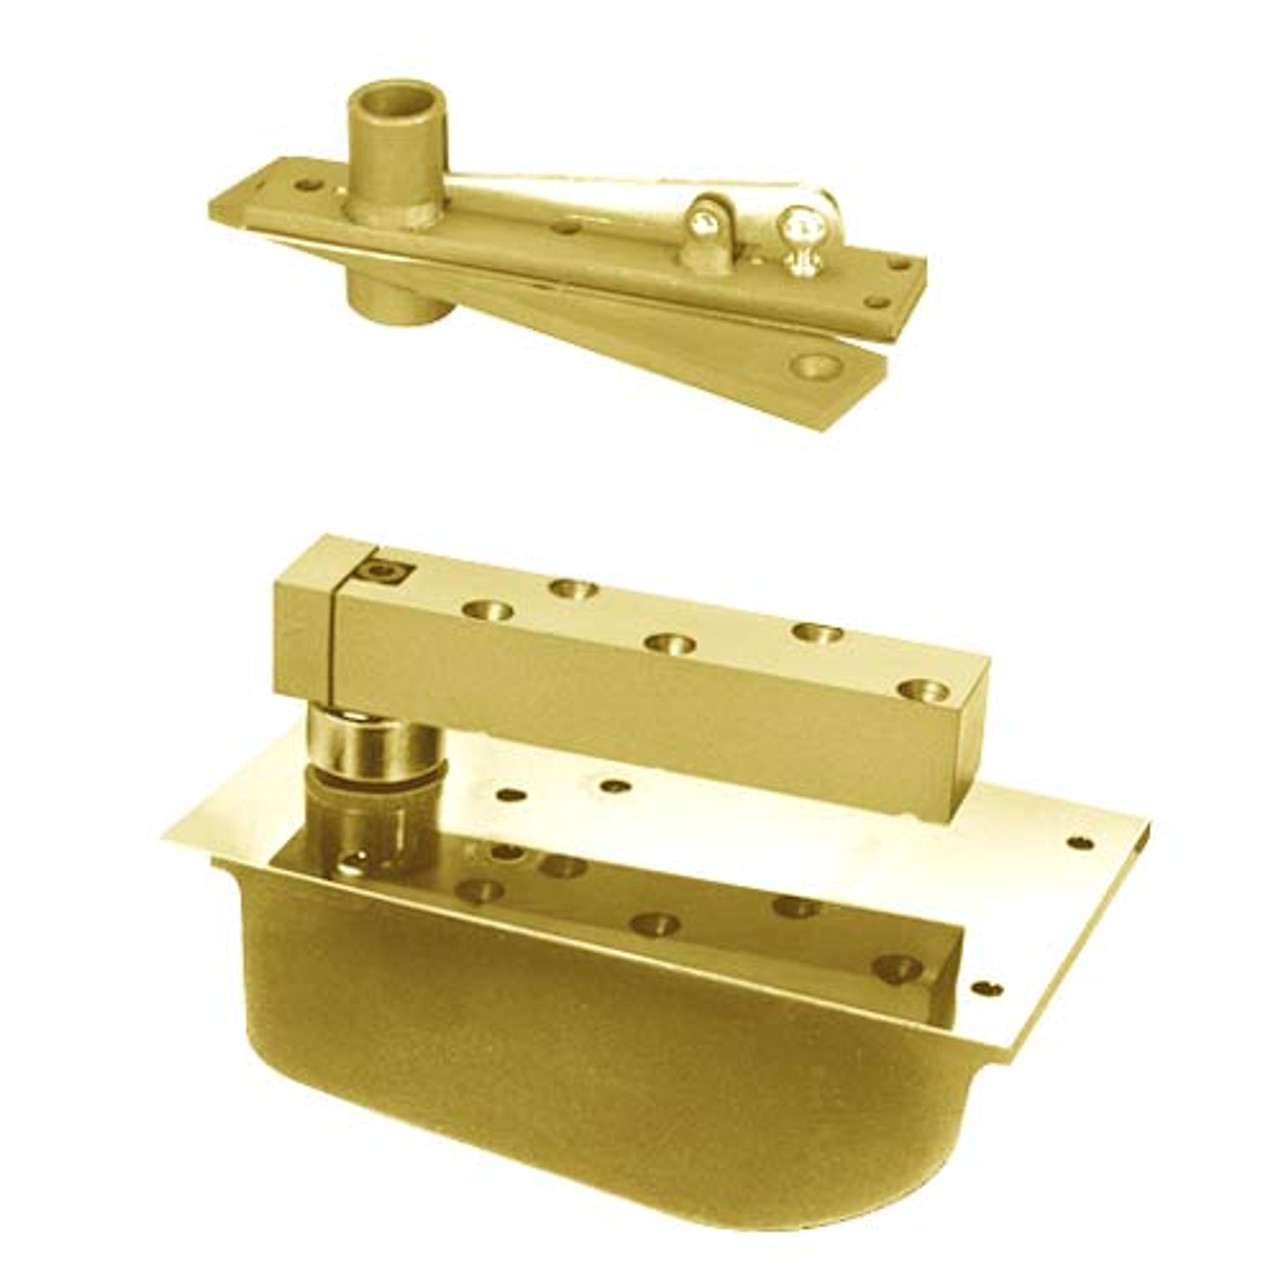 H28-95S-CWF-LH-605 Rixson 28 Series Heavy Duty Single Acting Center Hung Floor Closer in Bright Brass Finish